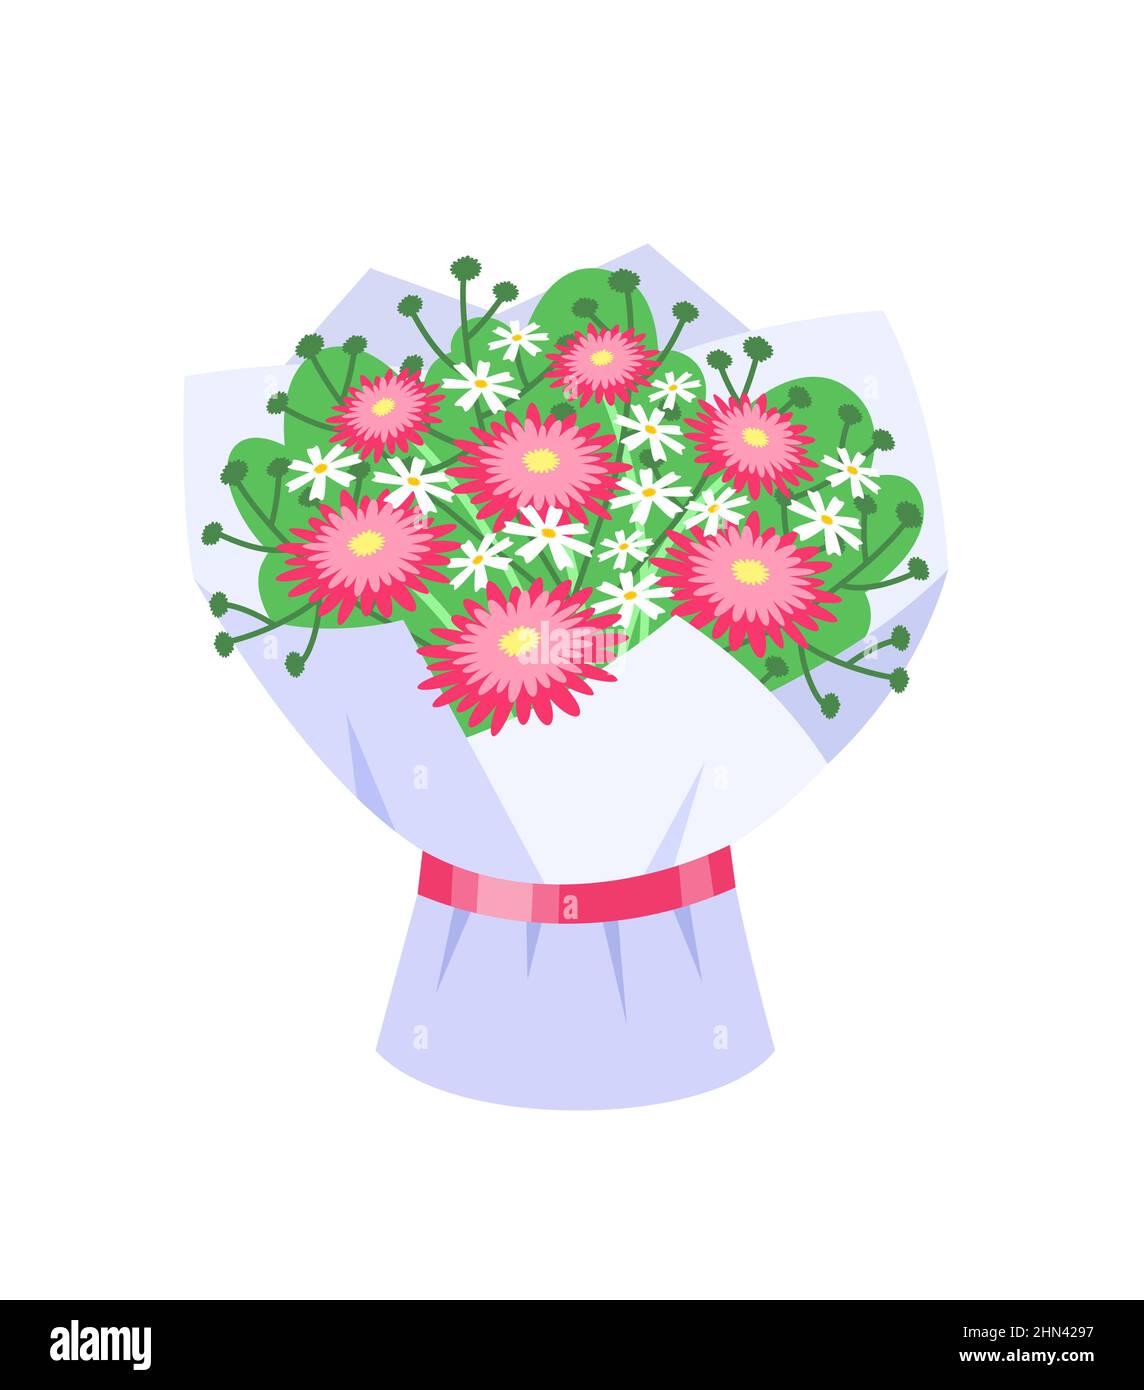 Beautiful romantic floral bouquet of asters and daisies flowers. Lovely floral arrangement tied with ribbon. Flat vector cartoon illustration. Graphic Stock Vector